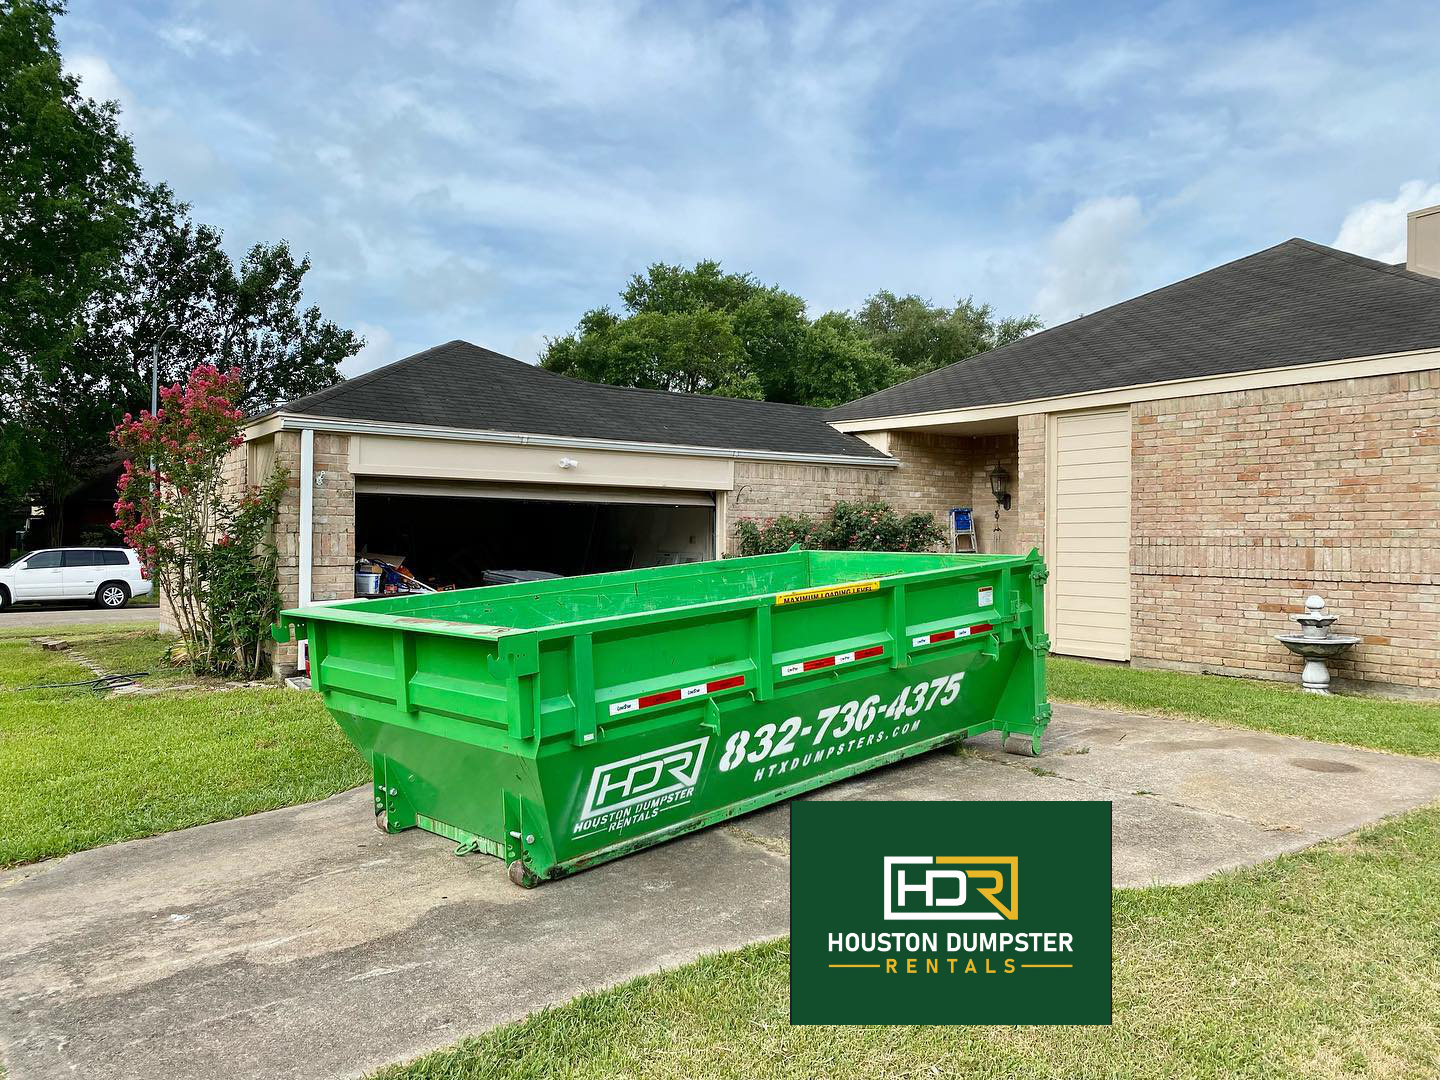 Construction Dumpster Rental HTX Dumpsters Pearland TX